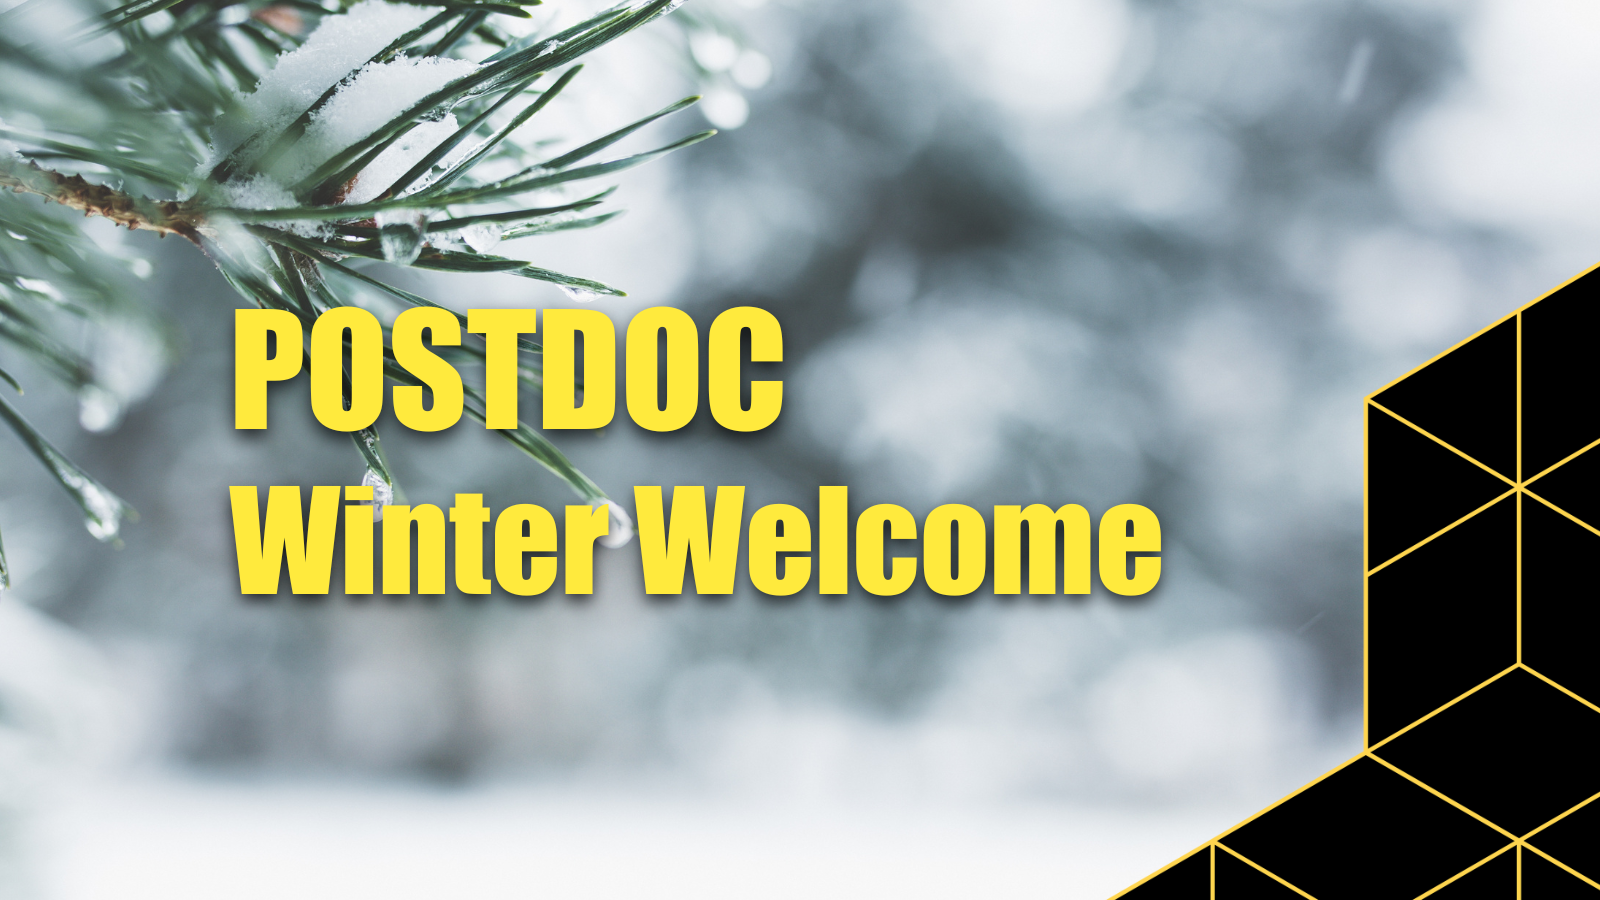 Postdoc winter welcome with wintery scene in background